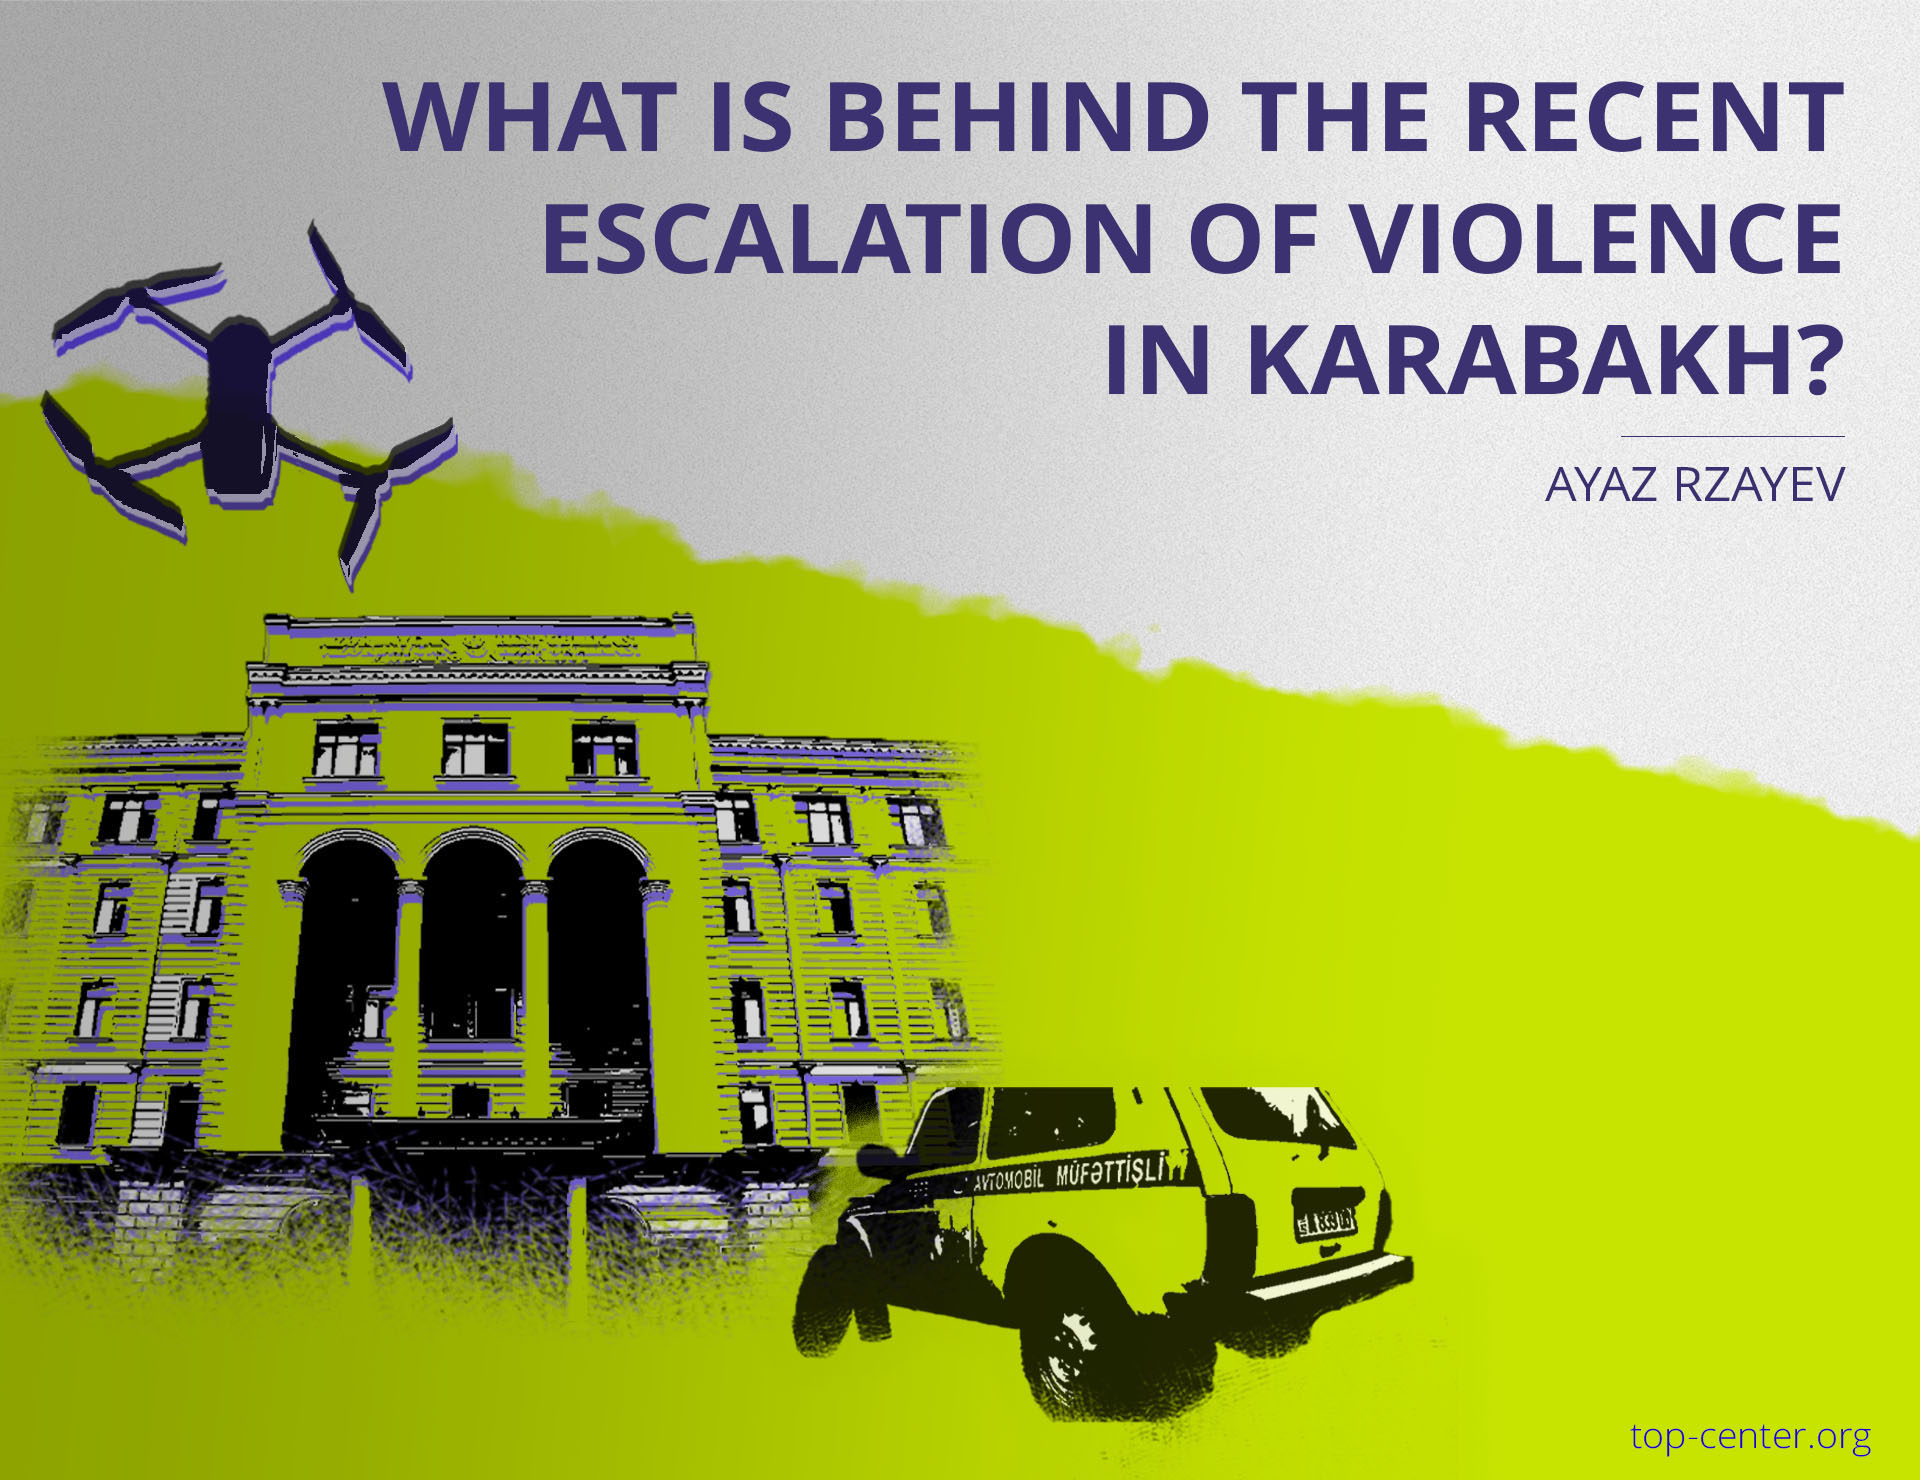 What is behind the recent escalation of violence in Karabakh?